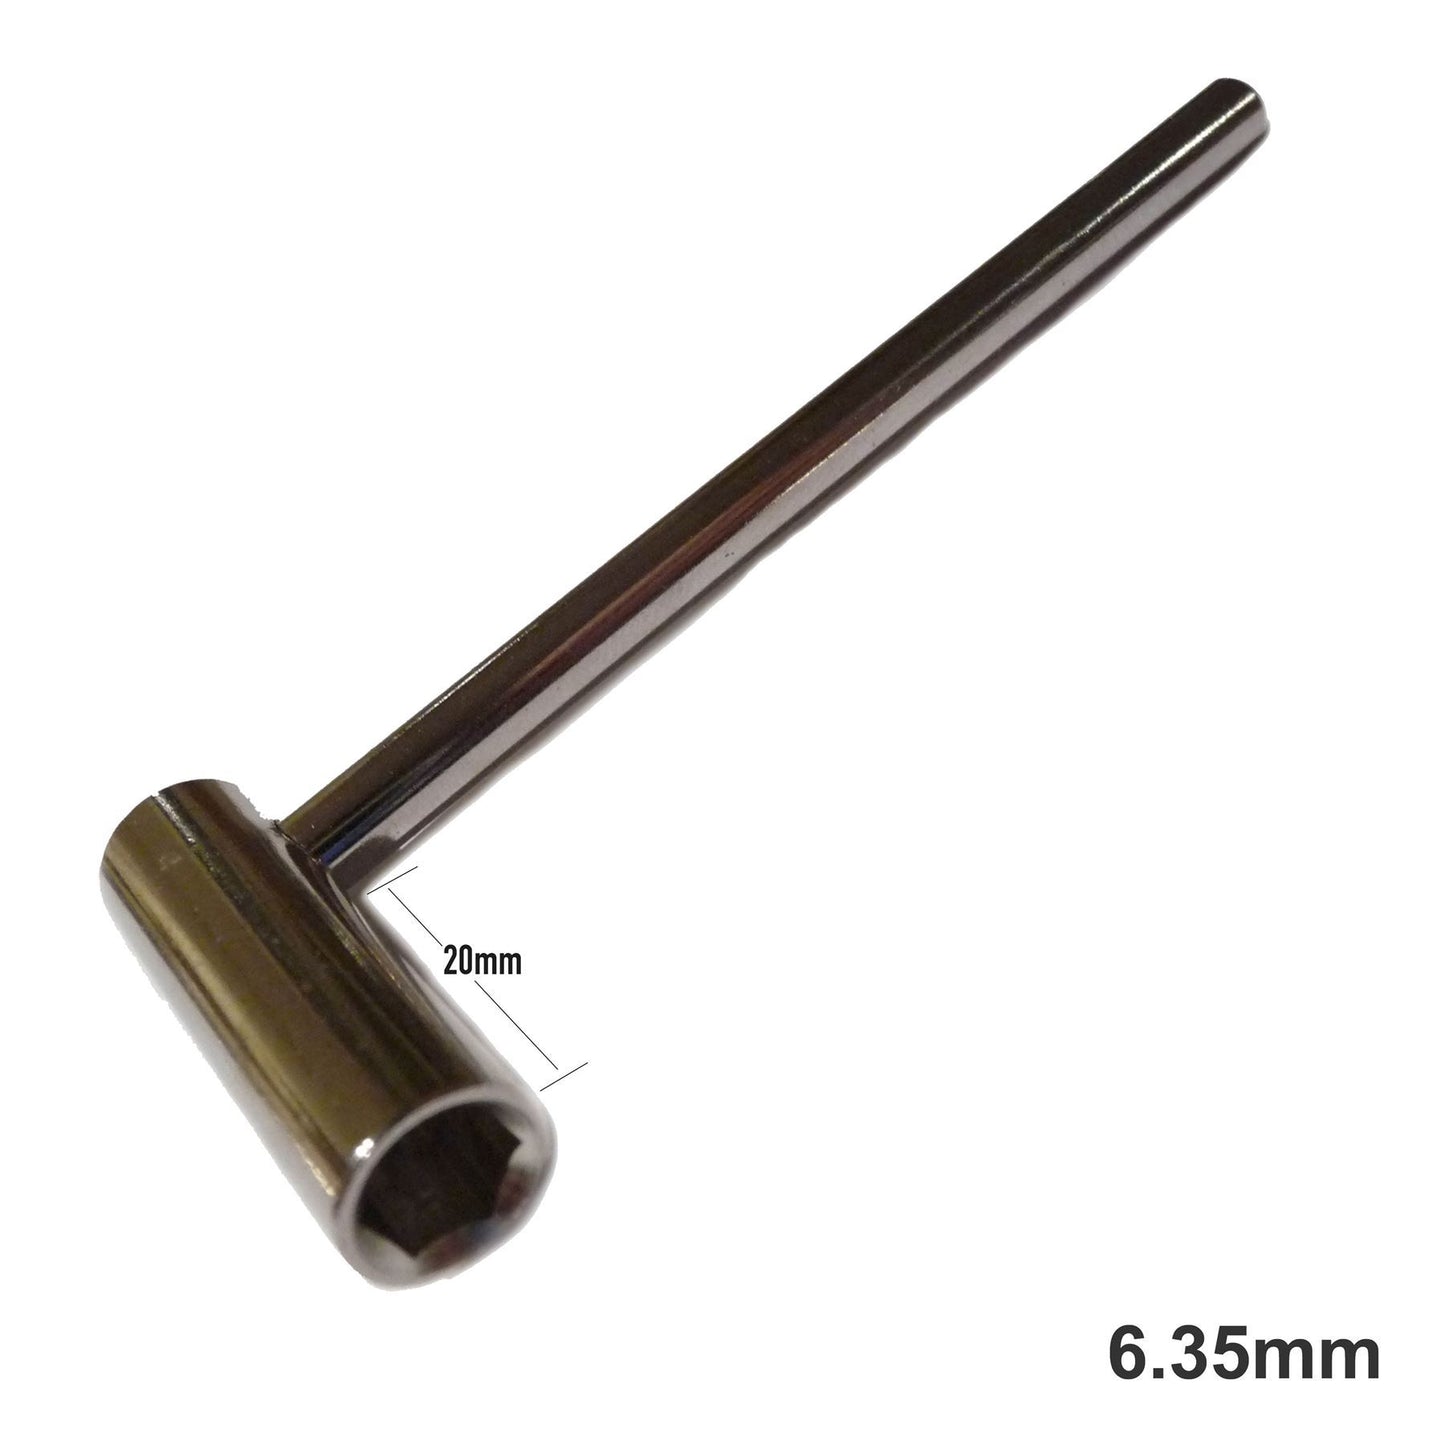 Guitar Truss Rod Hex Wrench / Luthier Tool For Gibson Epiphone etc - 6.35mm (1/4")